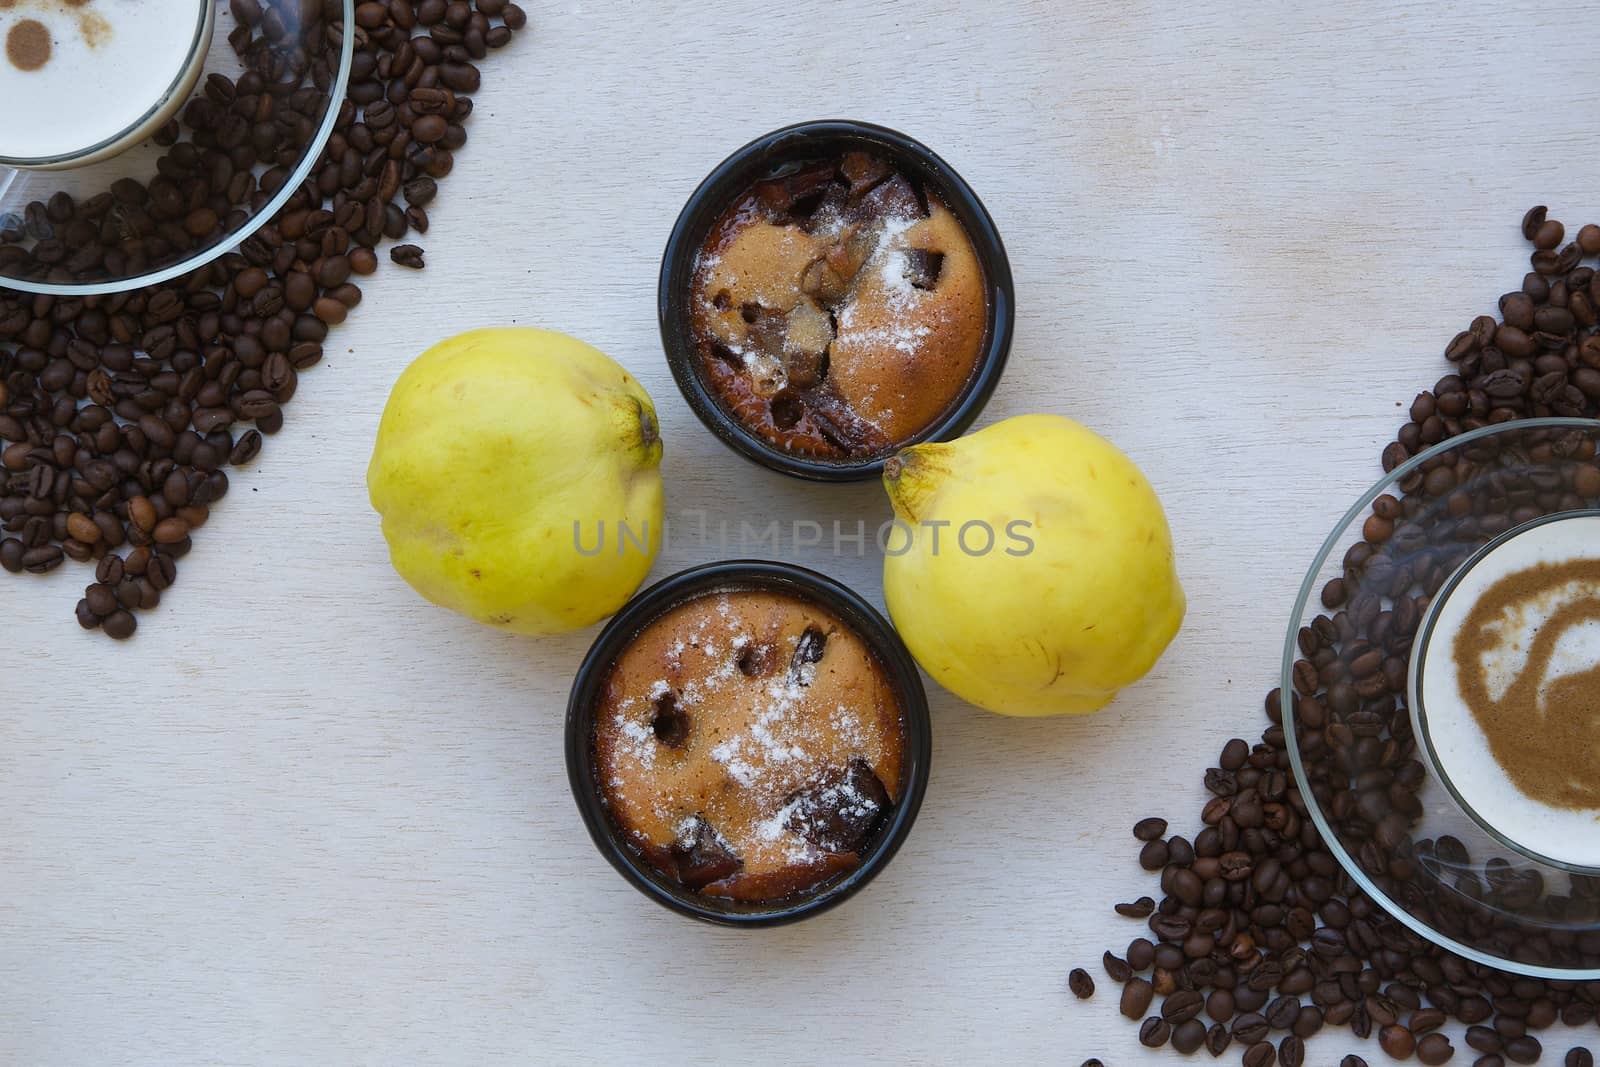 Small quince pies in black ceramic moulds, two fresh quinces, two glass cup of cappuccino. Top view